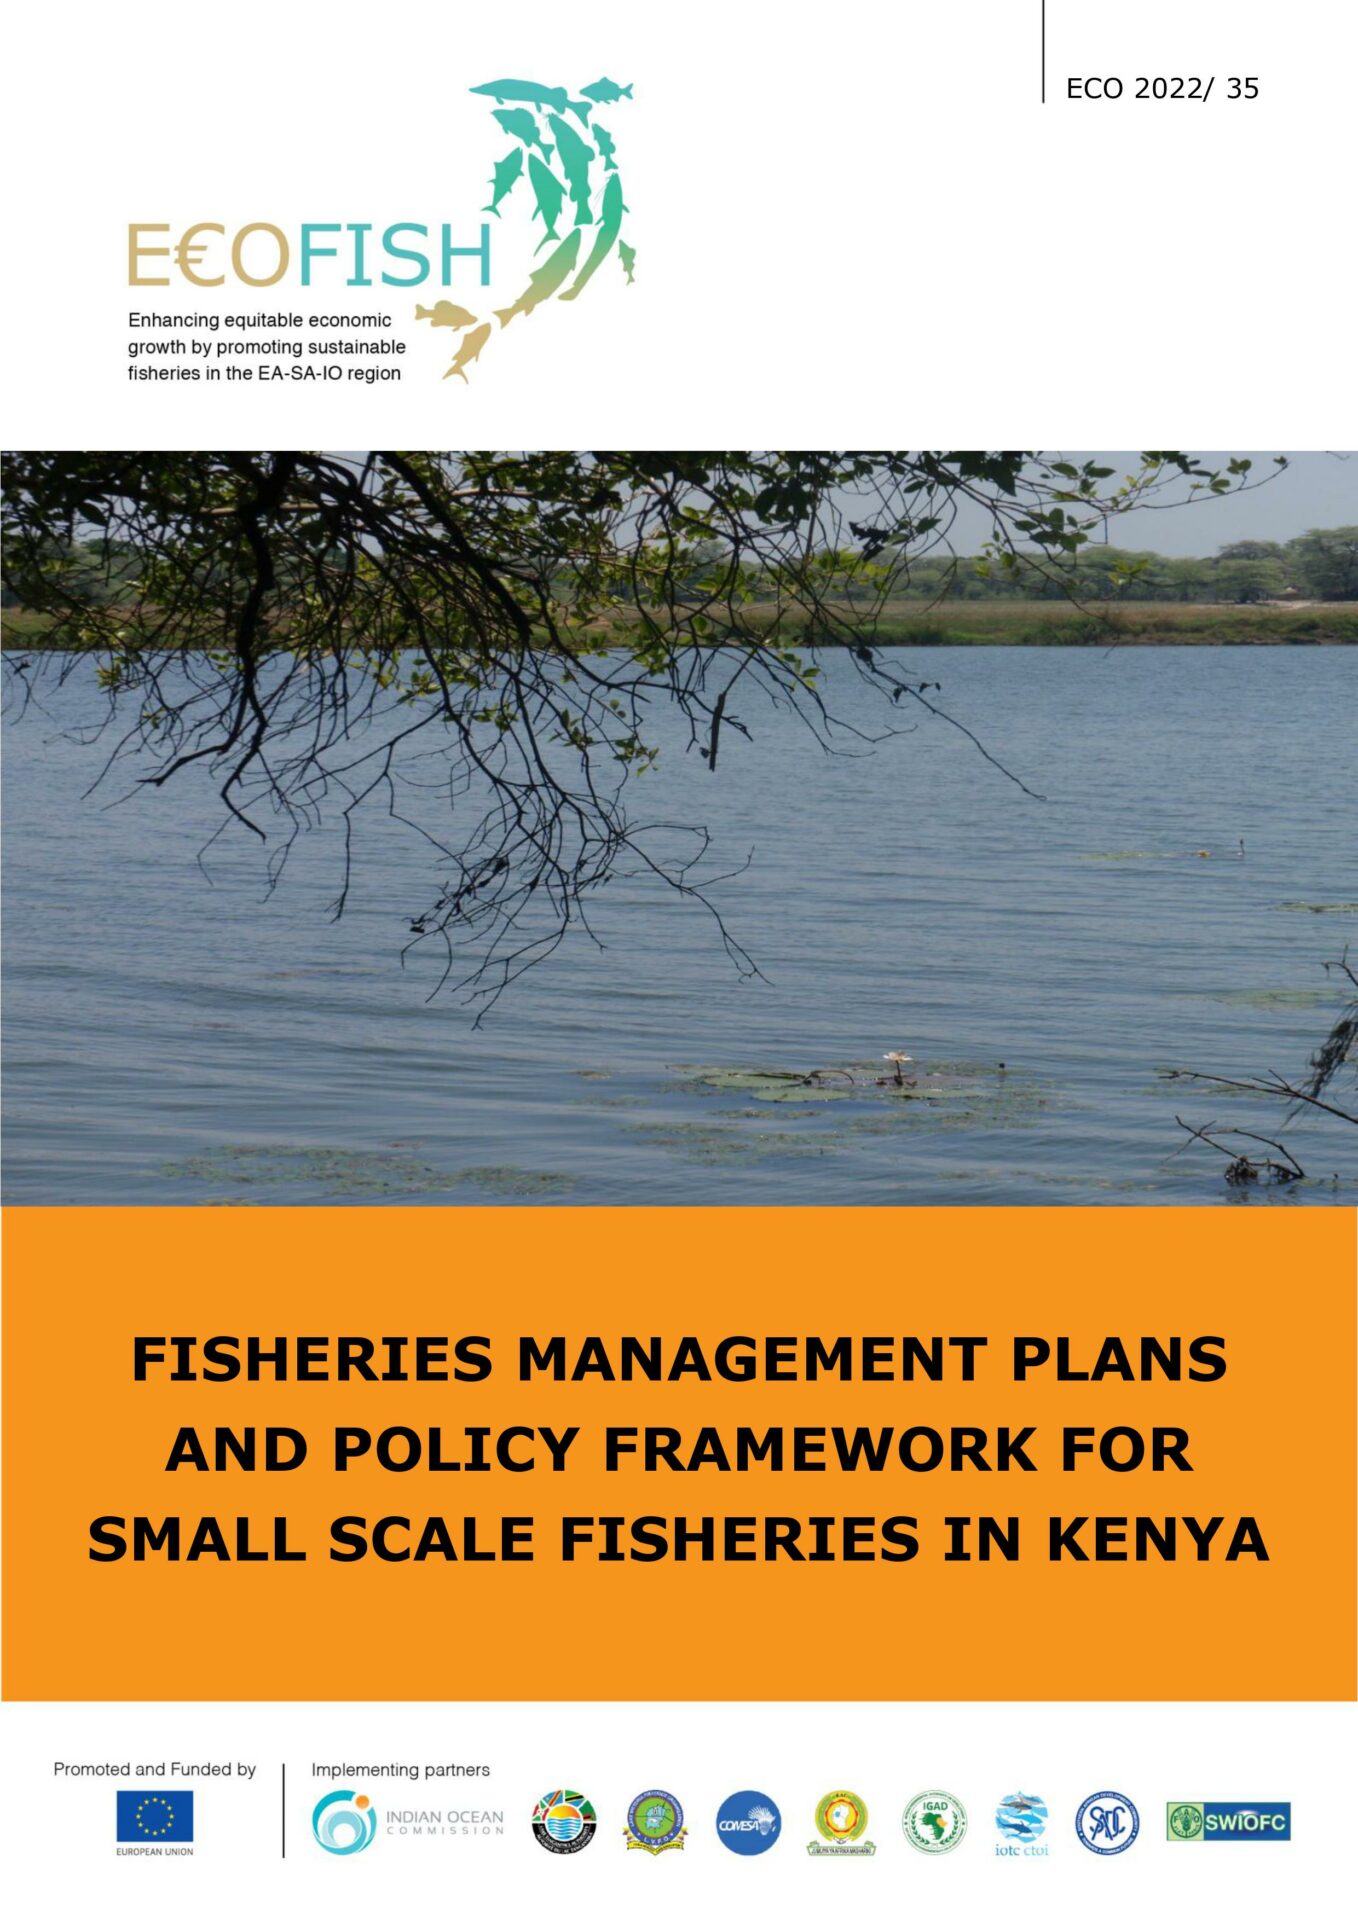 FISHERIES MANAGEMENT PLANS AND POLICY FRAMEWORK FOR SMALL SCALE FISHERIES IN KENYA